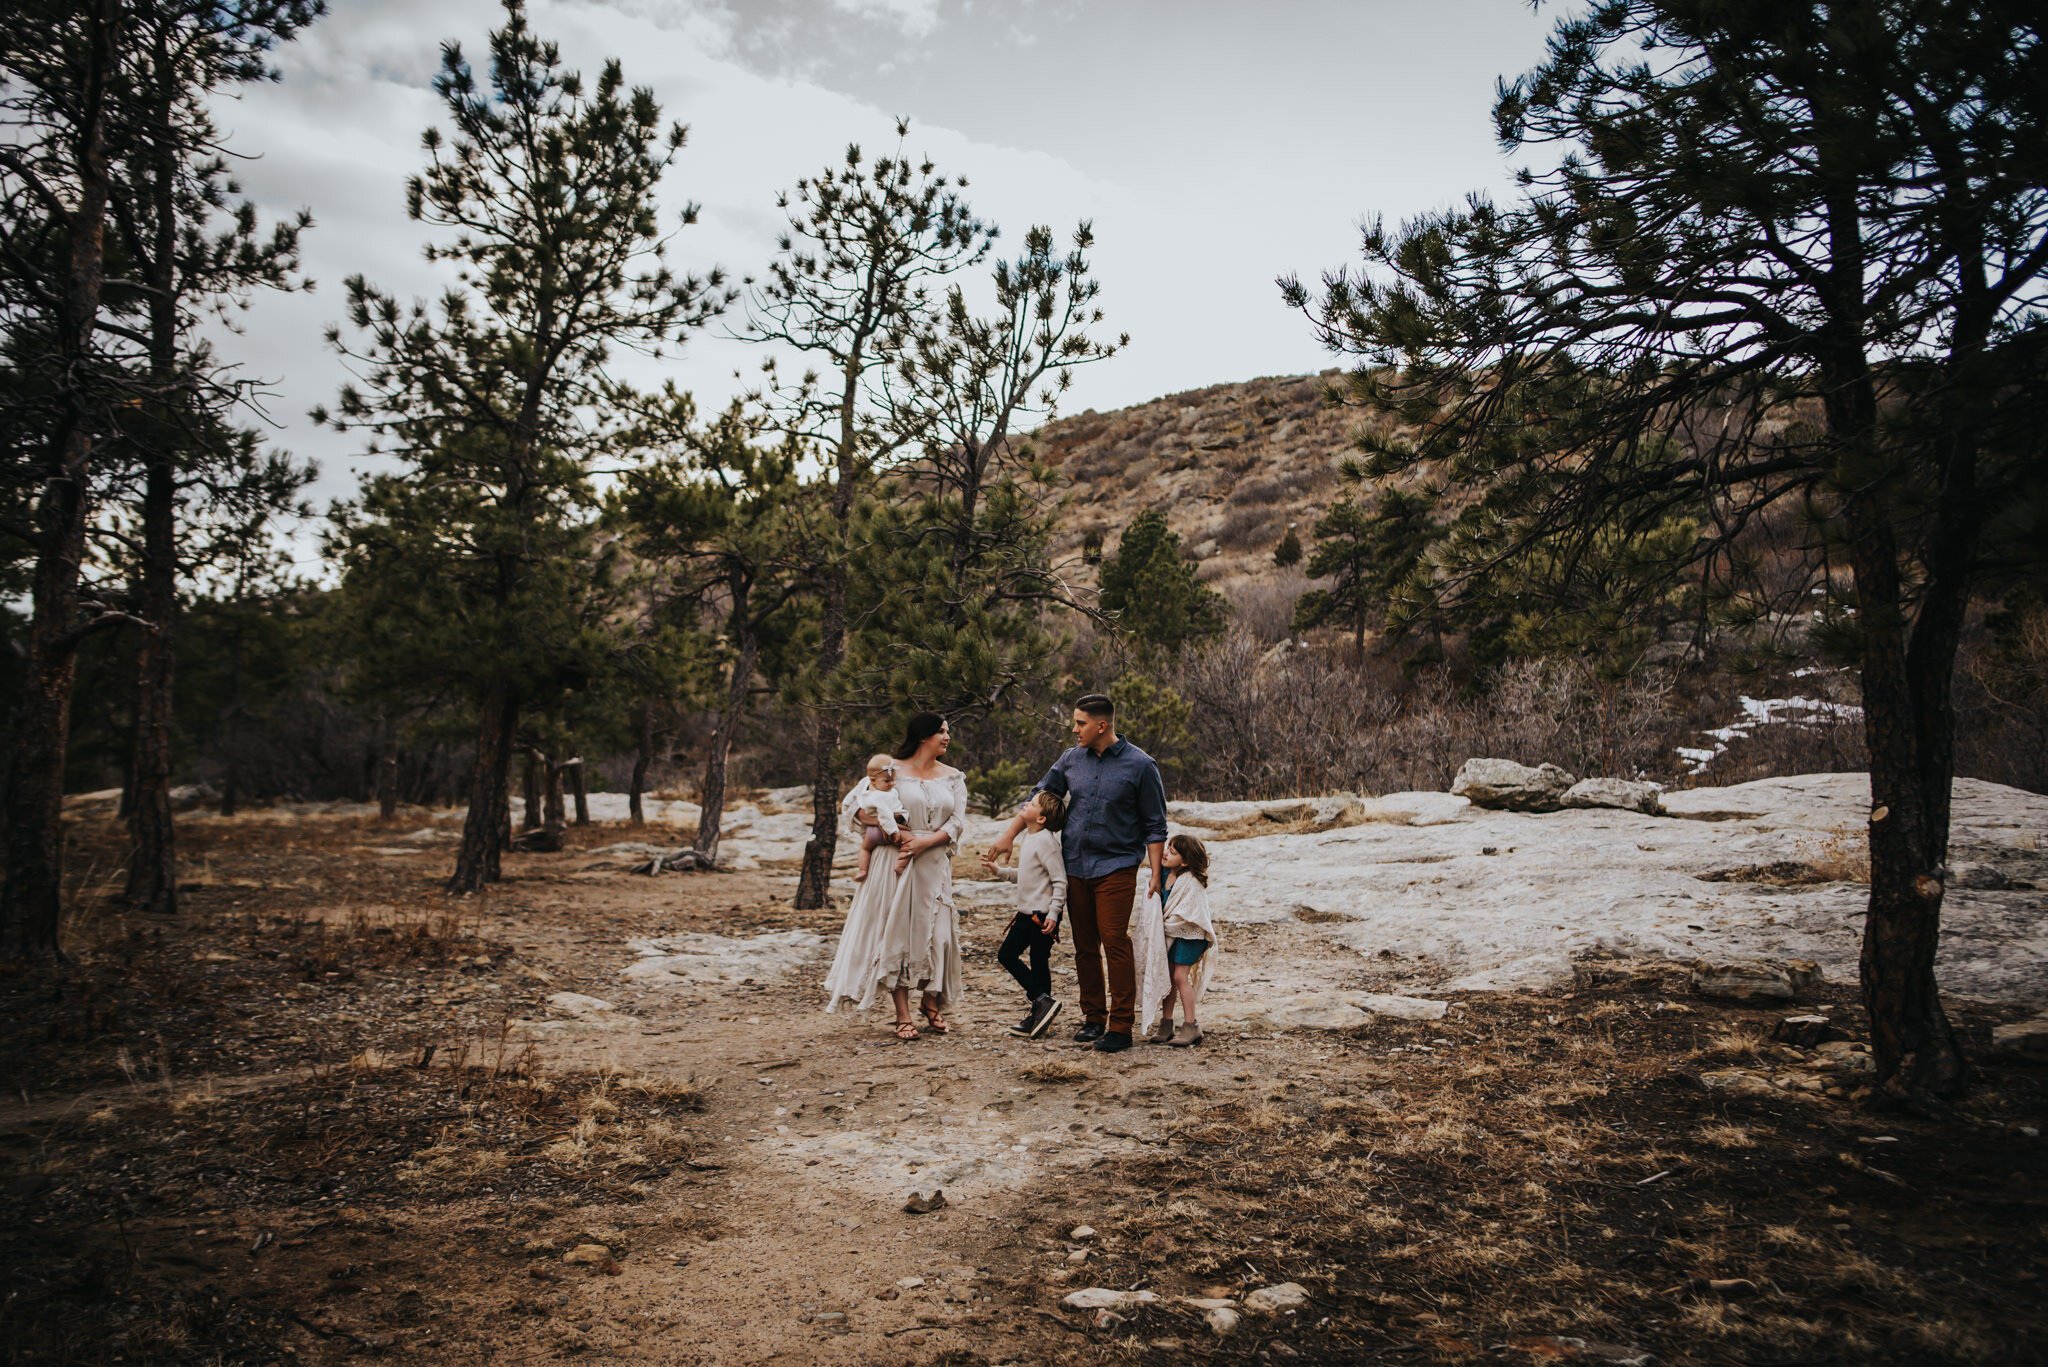 Miller+Family+Session+Mentorship+Colorado+Springs+Colorado+Sunset+Ute+Valley+Park+Mountains+Fields+Mom+Dad+Son+Daughter+Baby+Wild+Prairie+Photography-26-2020.jpeg